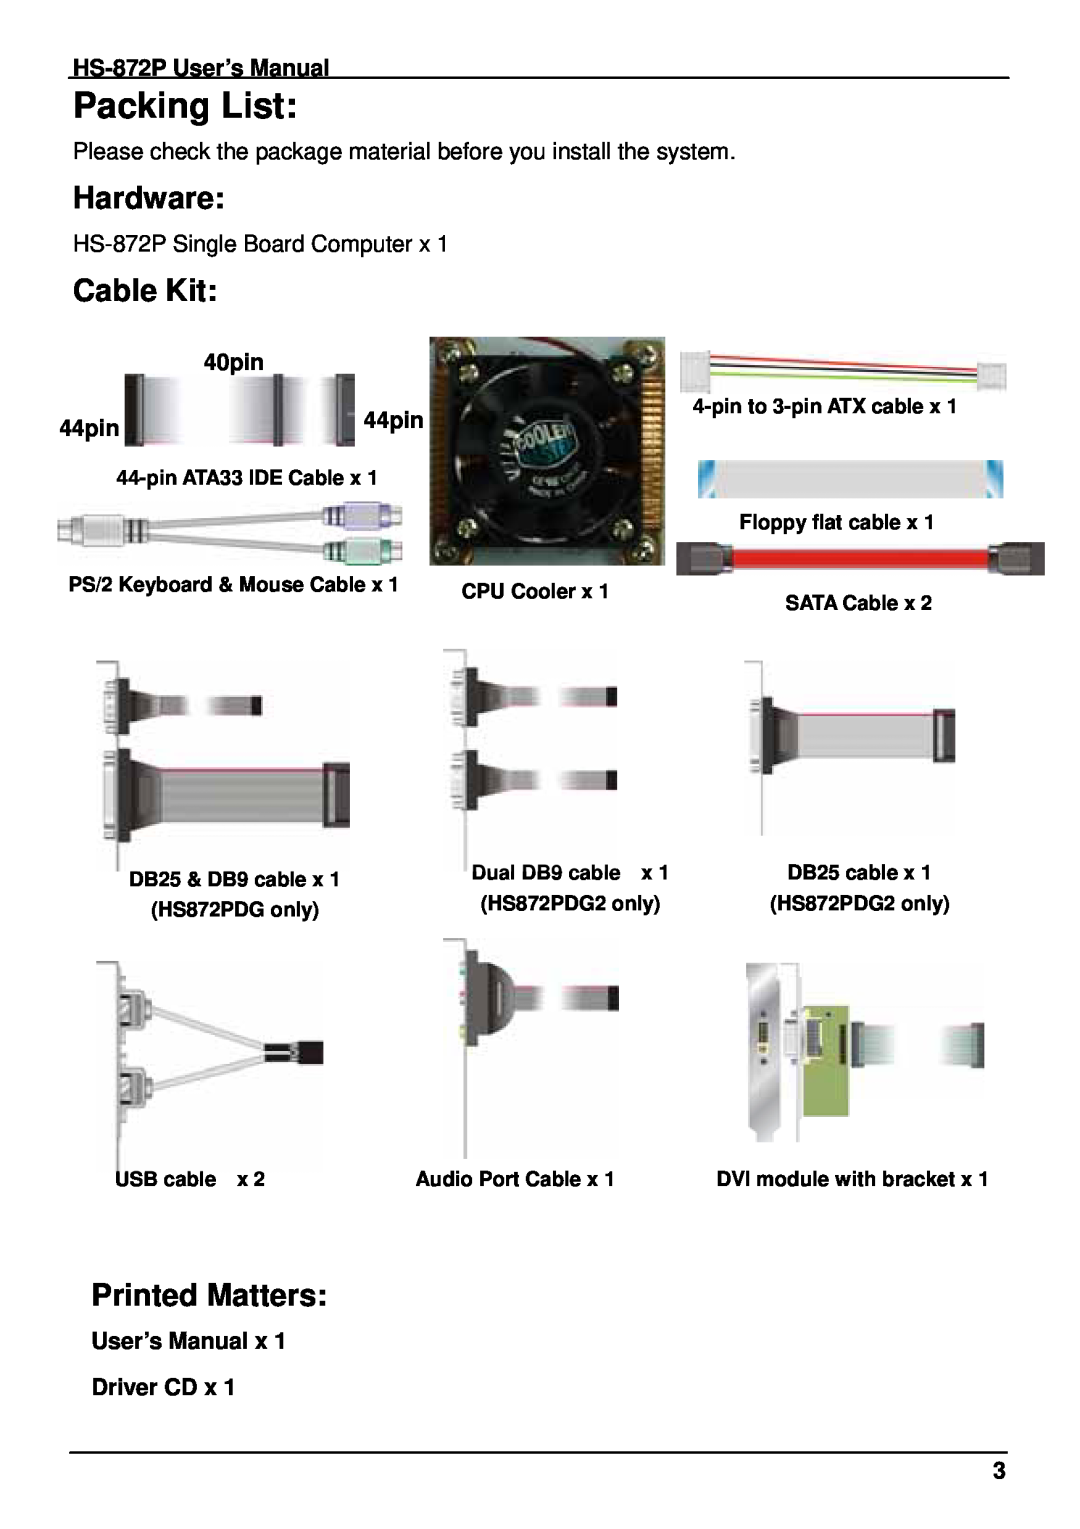 Intel half-size single board computer Packing List, Hardware, Cable Kit, Printed Matters, pin ATA33 IDE Cable x, USB cable 